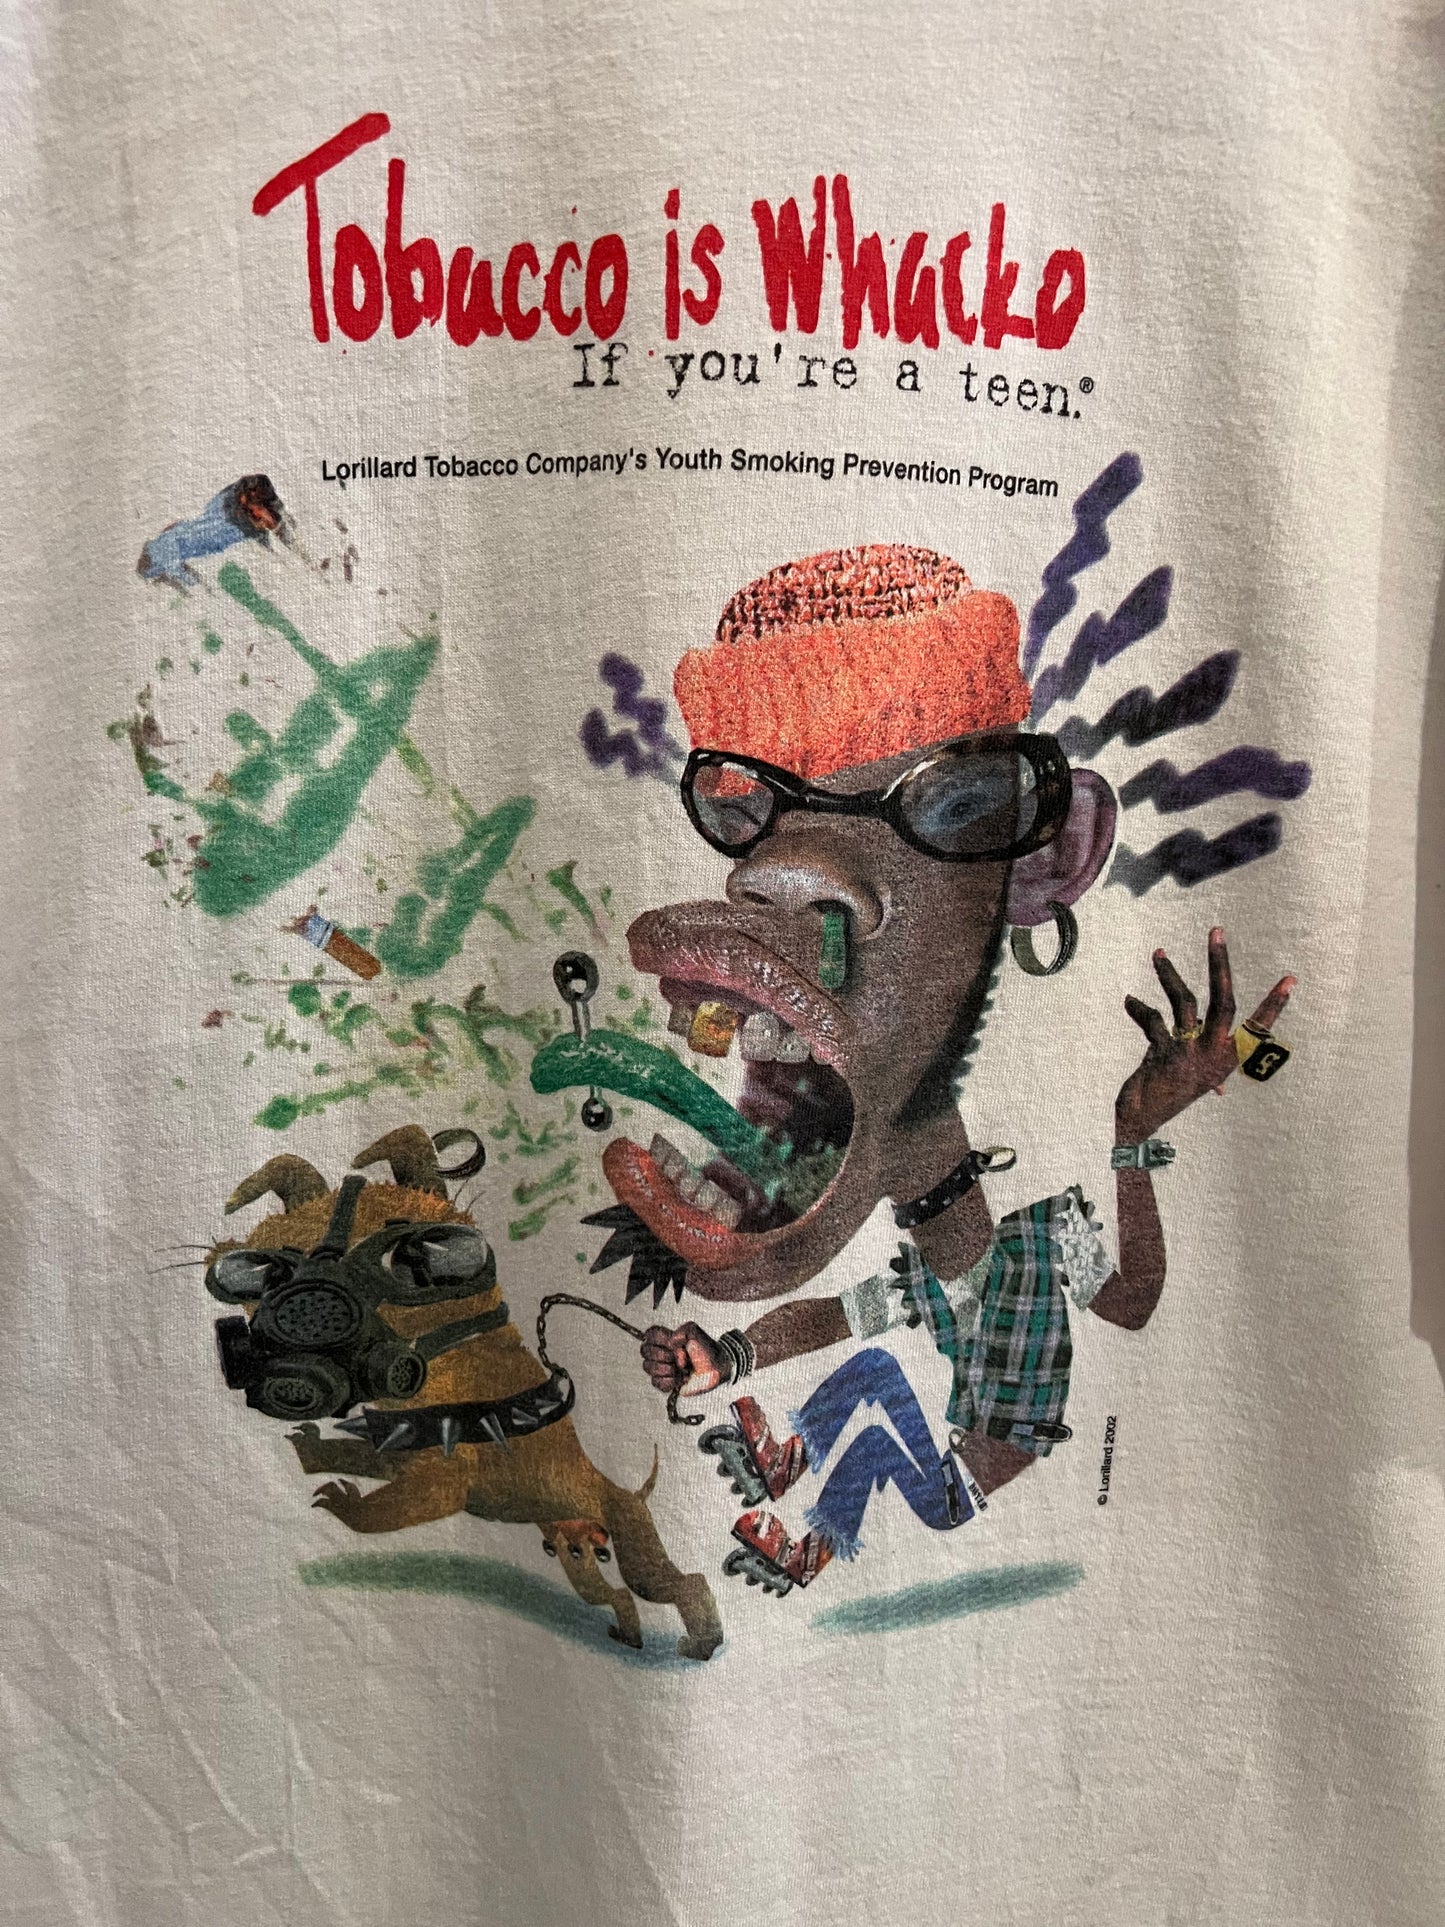 2002 Tabacco is Whacko T-shirt size XL